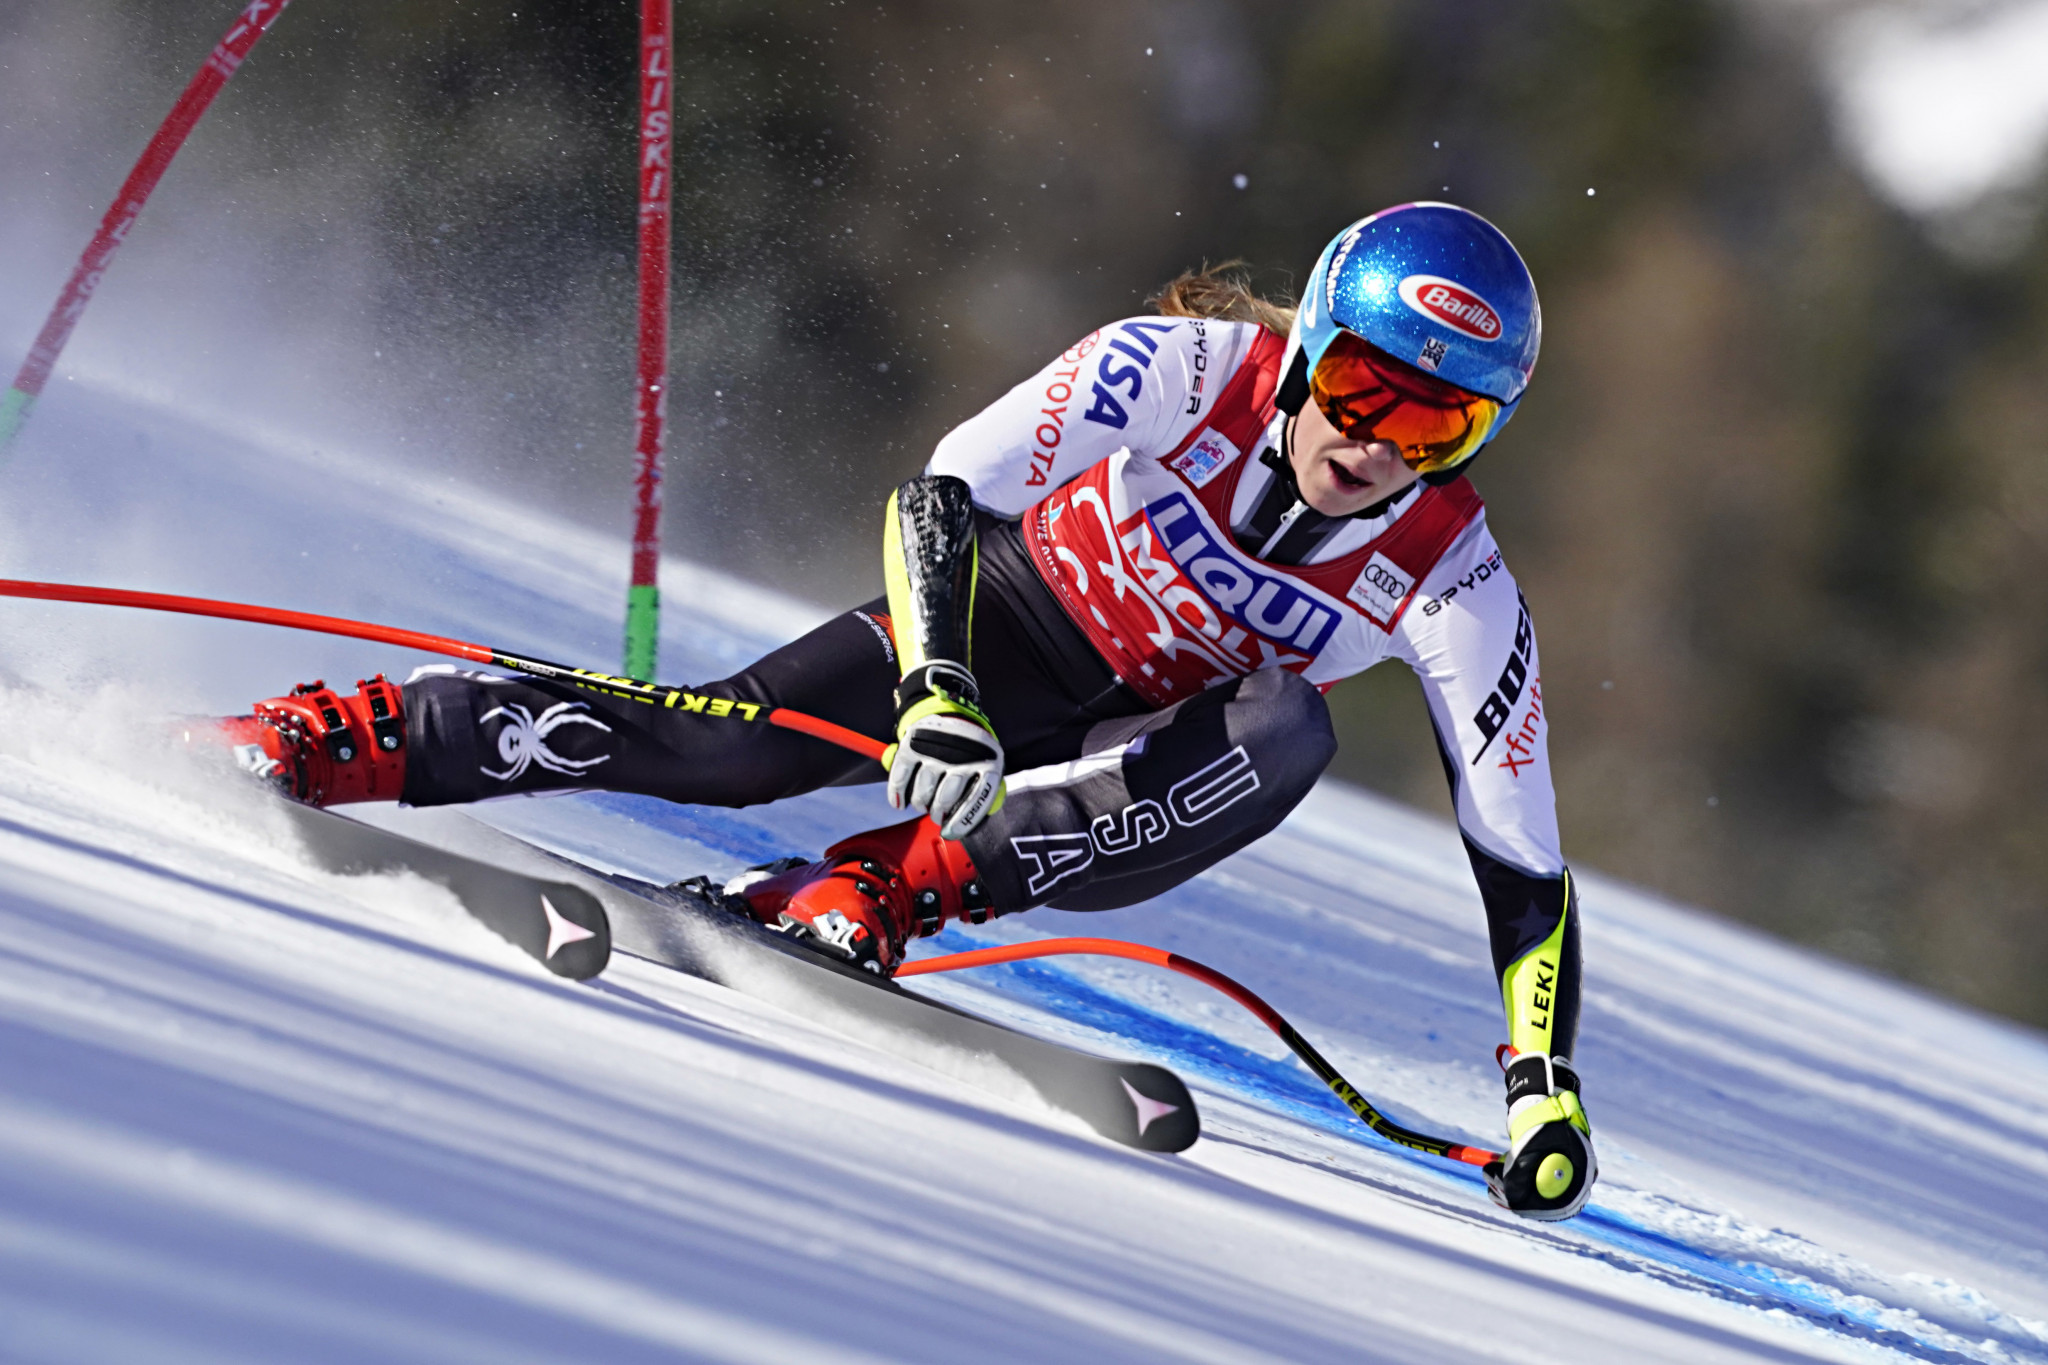 Vonn considering retirement as Shiffrin wins again at FIS Alpine Skiing World Cup